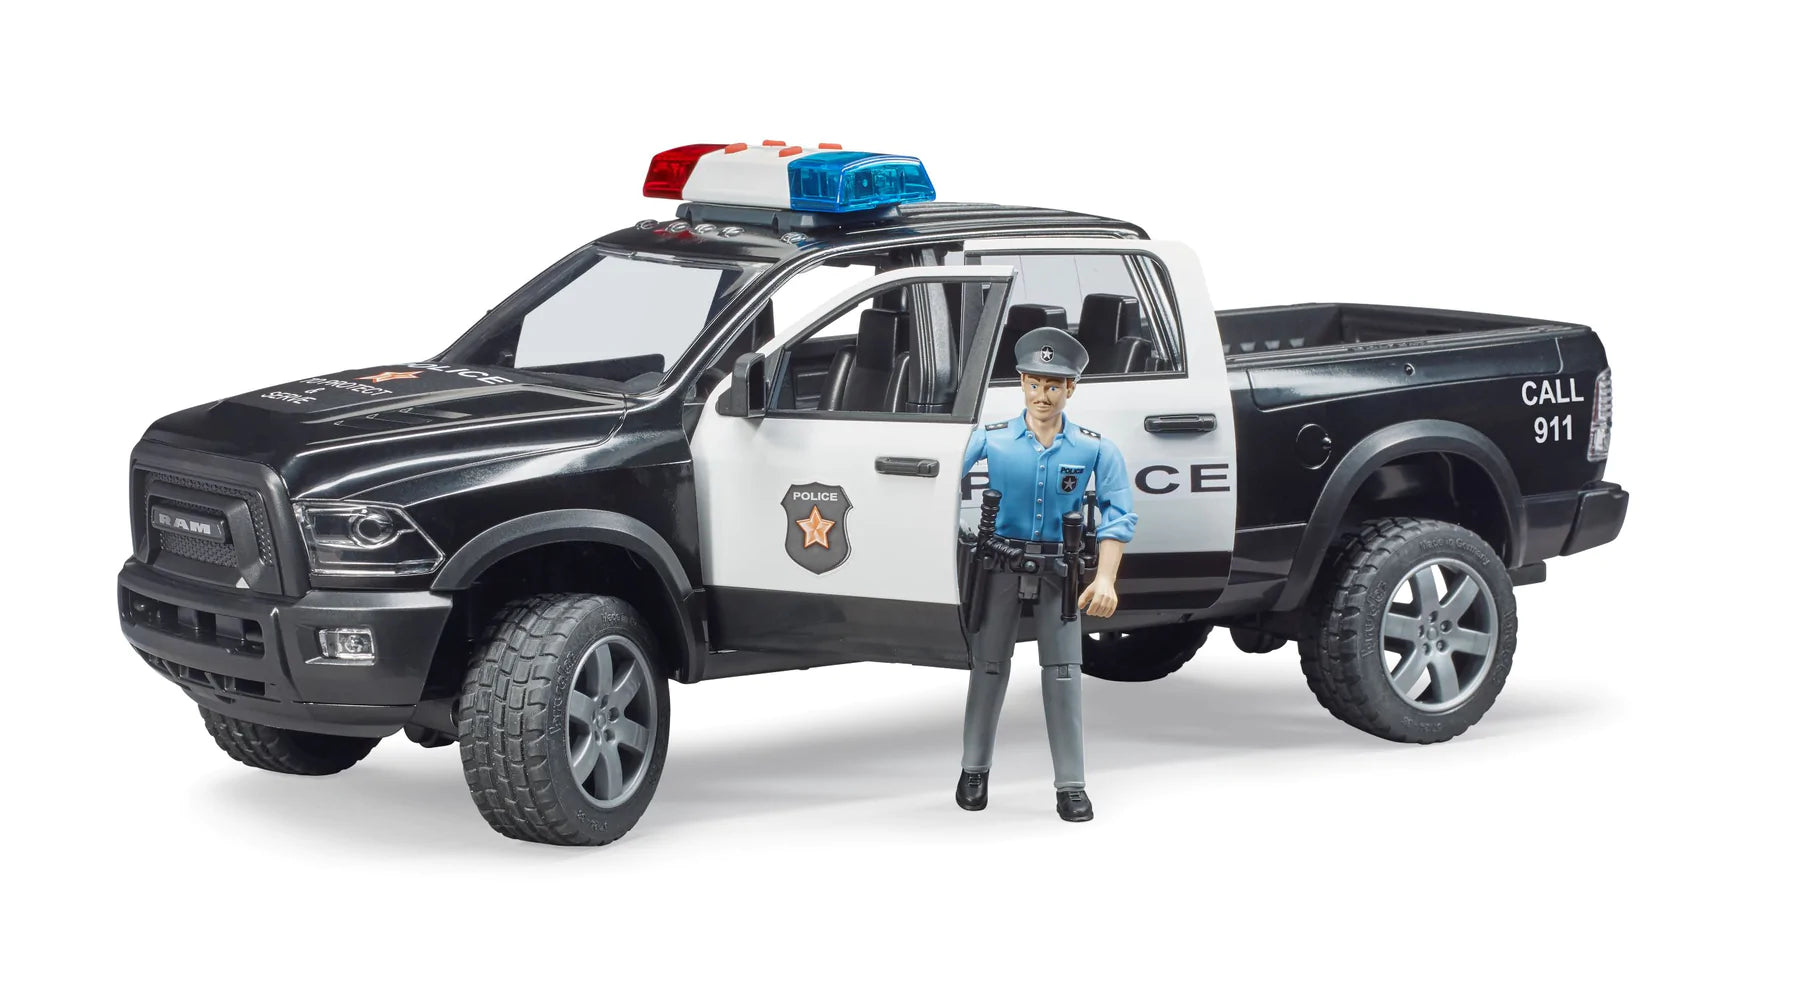 Police Ram w/ Policeman and Light Sound – Mother Earth Baby/Curious Kidz Toys